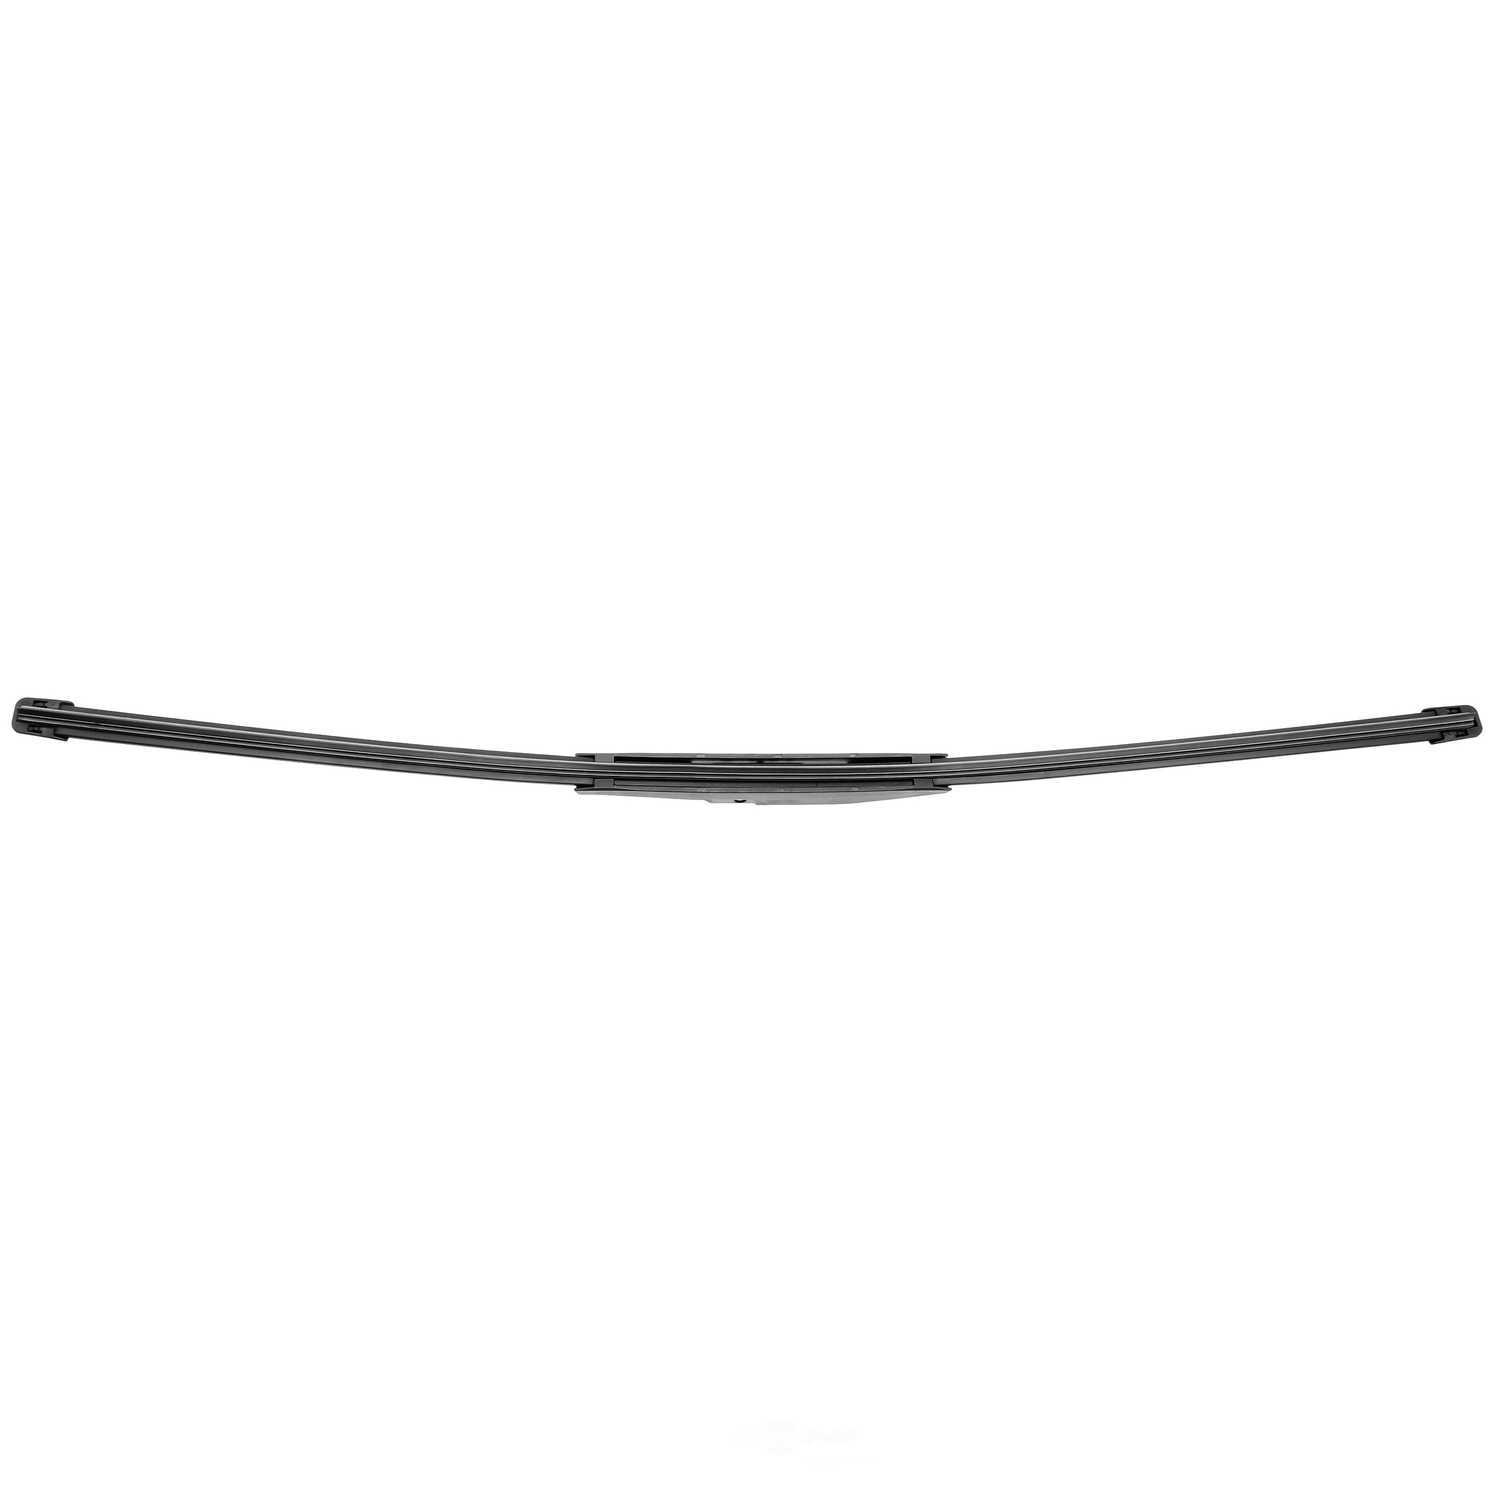 ACDELCO GOLD/PROFESSIONAL - Beam Wiper Blade - DCC 8-9928